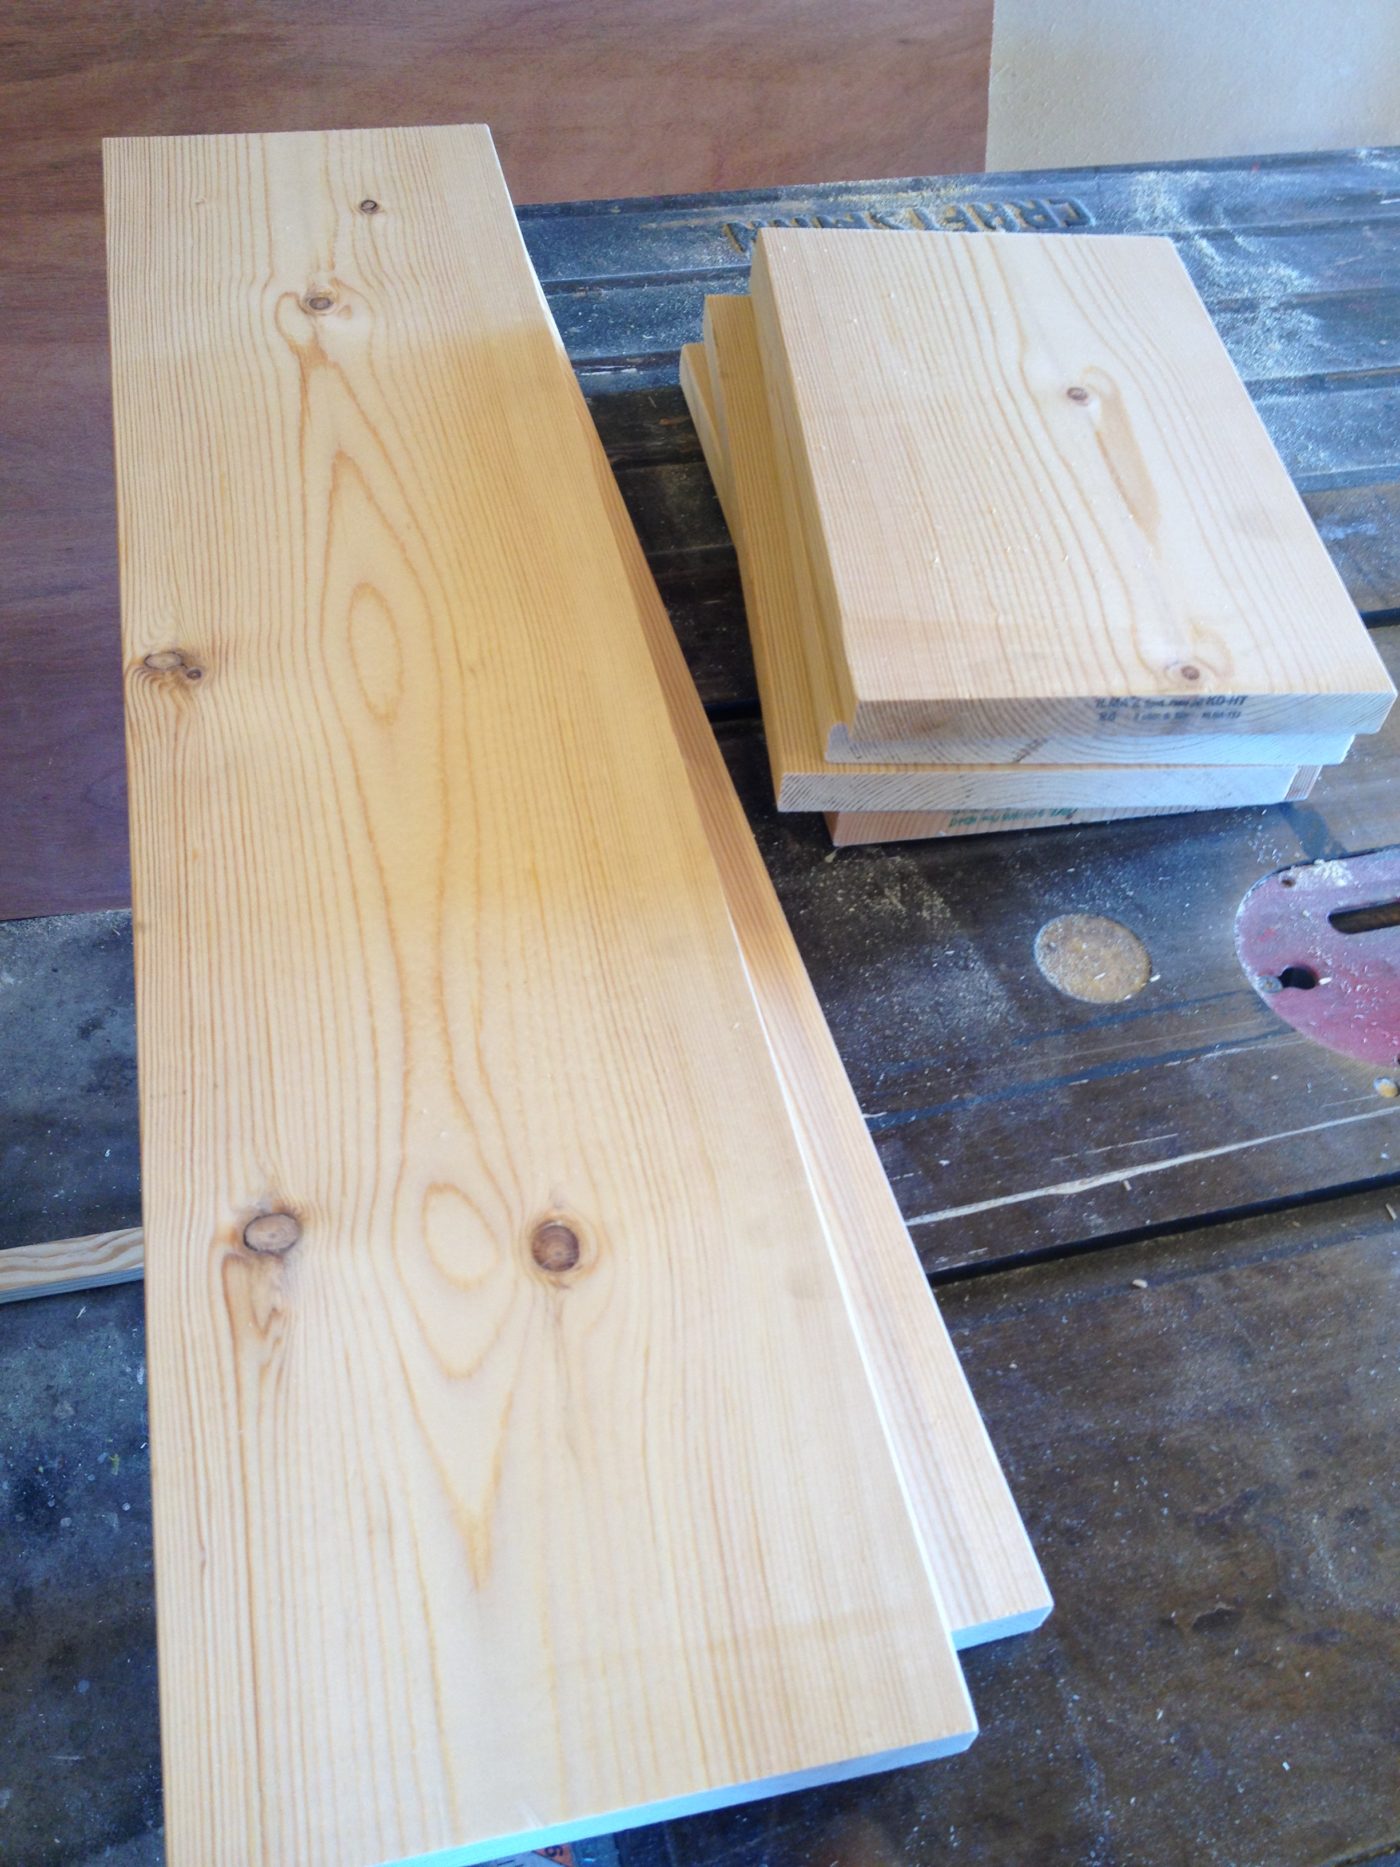 1x8 board cut into pieces to assemble floating shelves--two 28" boards and four 10" boards on workbench